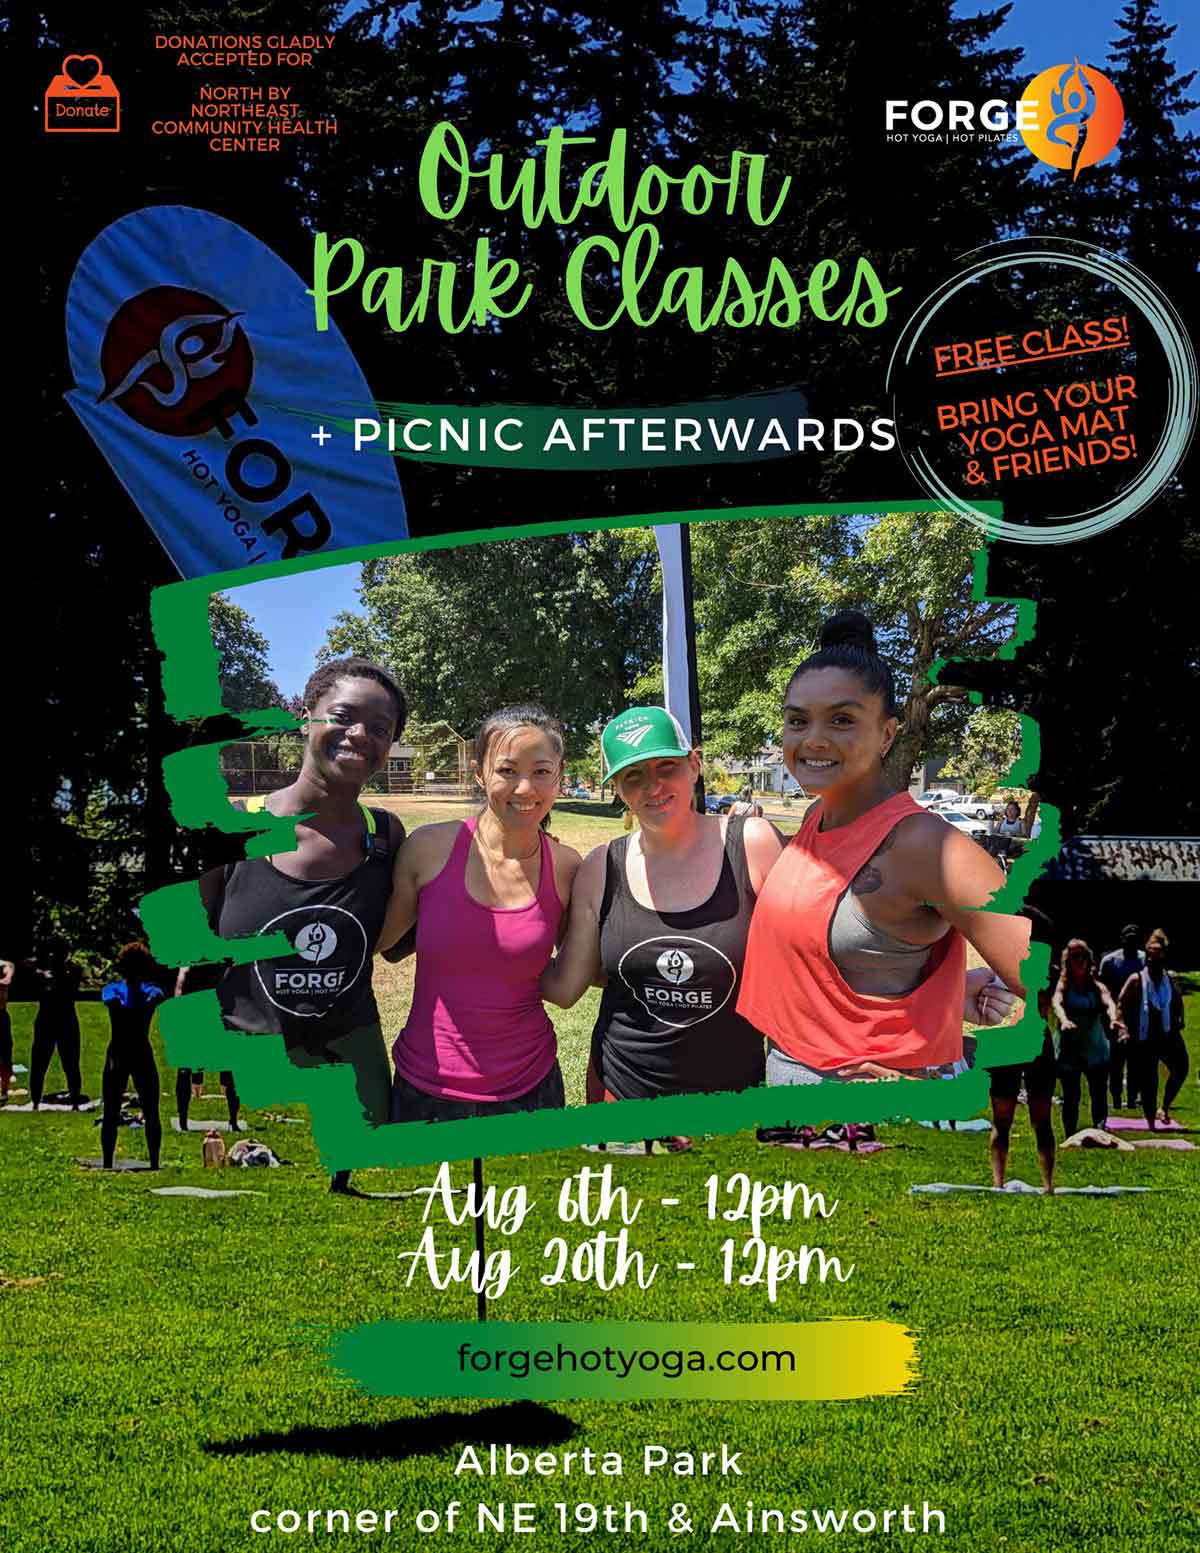 Forge Hot Yoga Outdoor Summer Park Classes